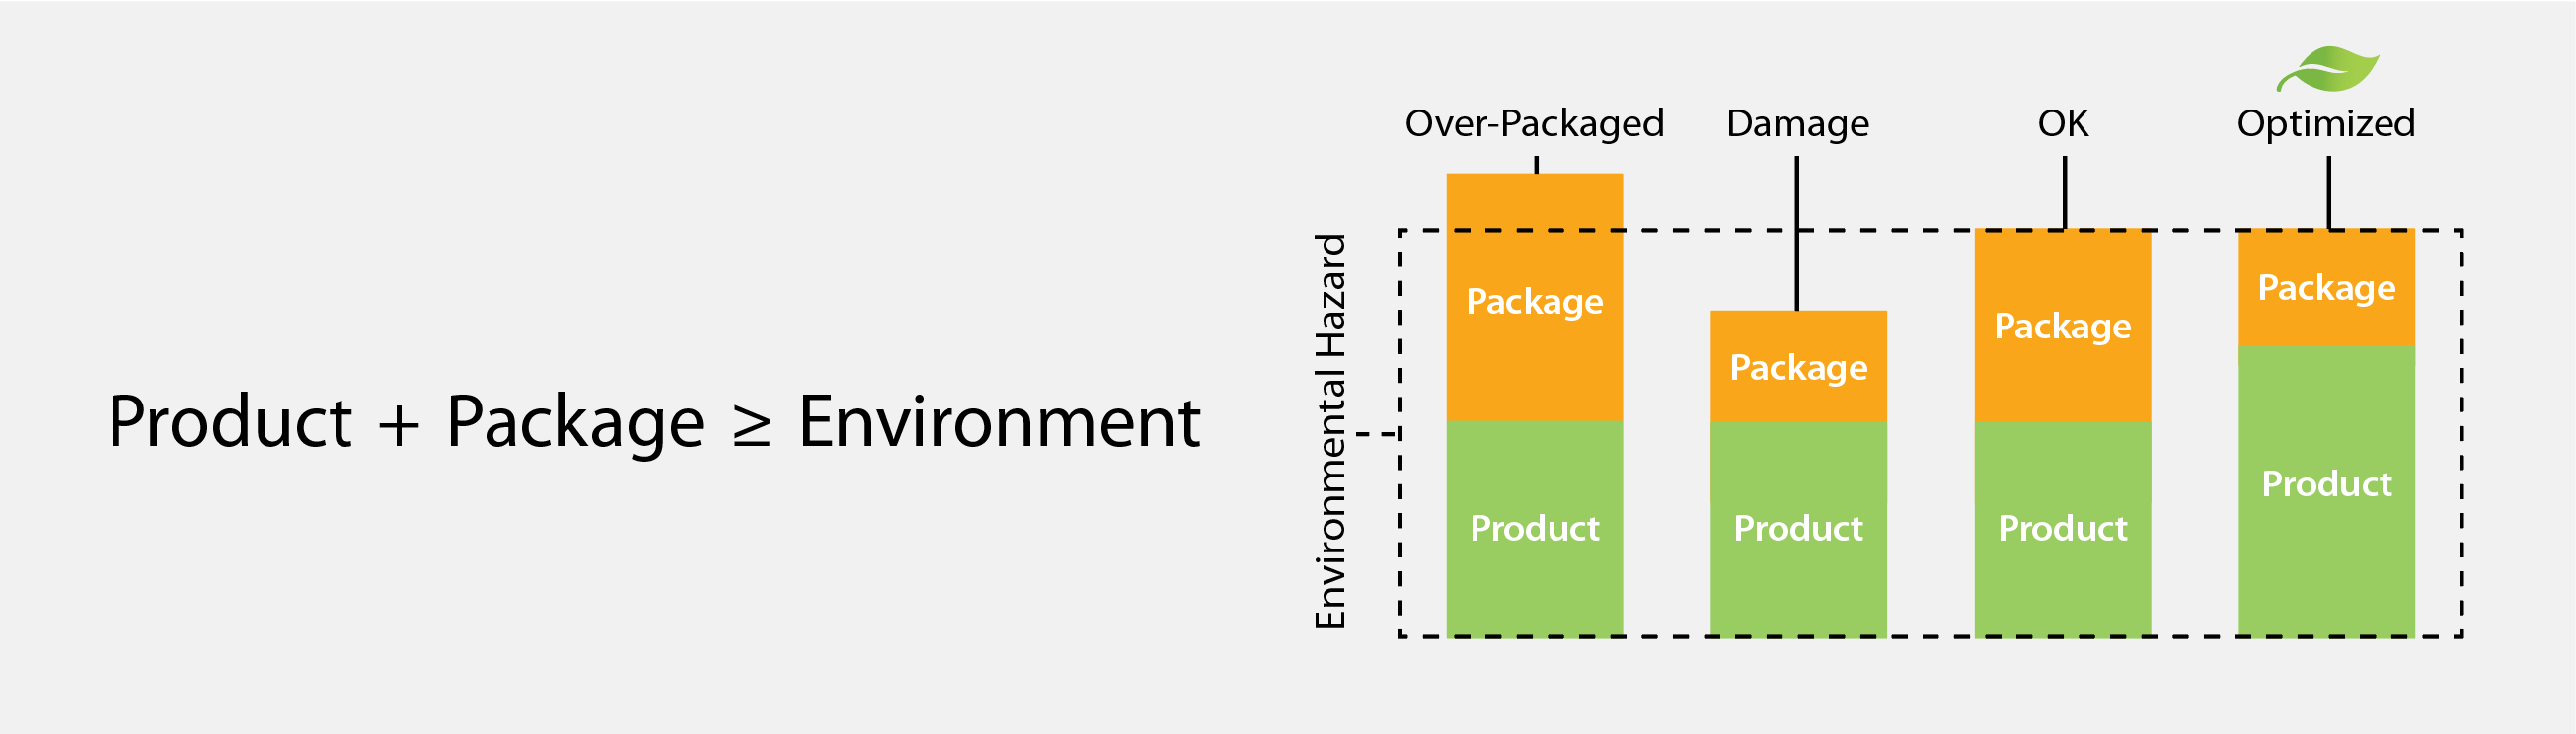 Infographic of optimal packaging to overcome environmental hazards.